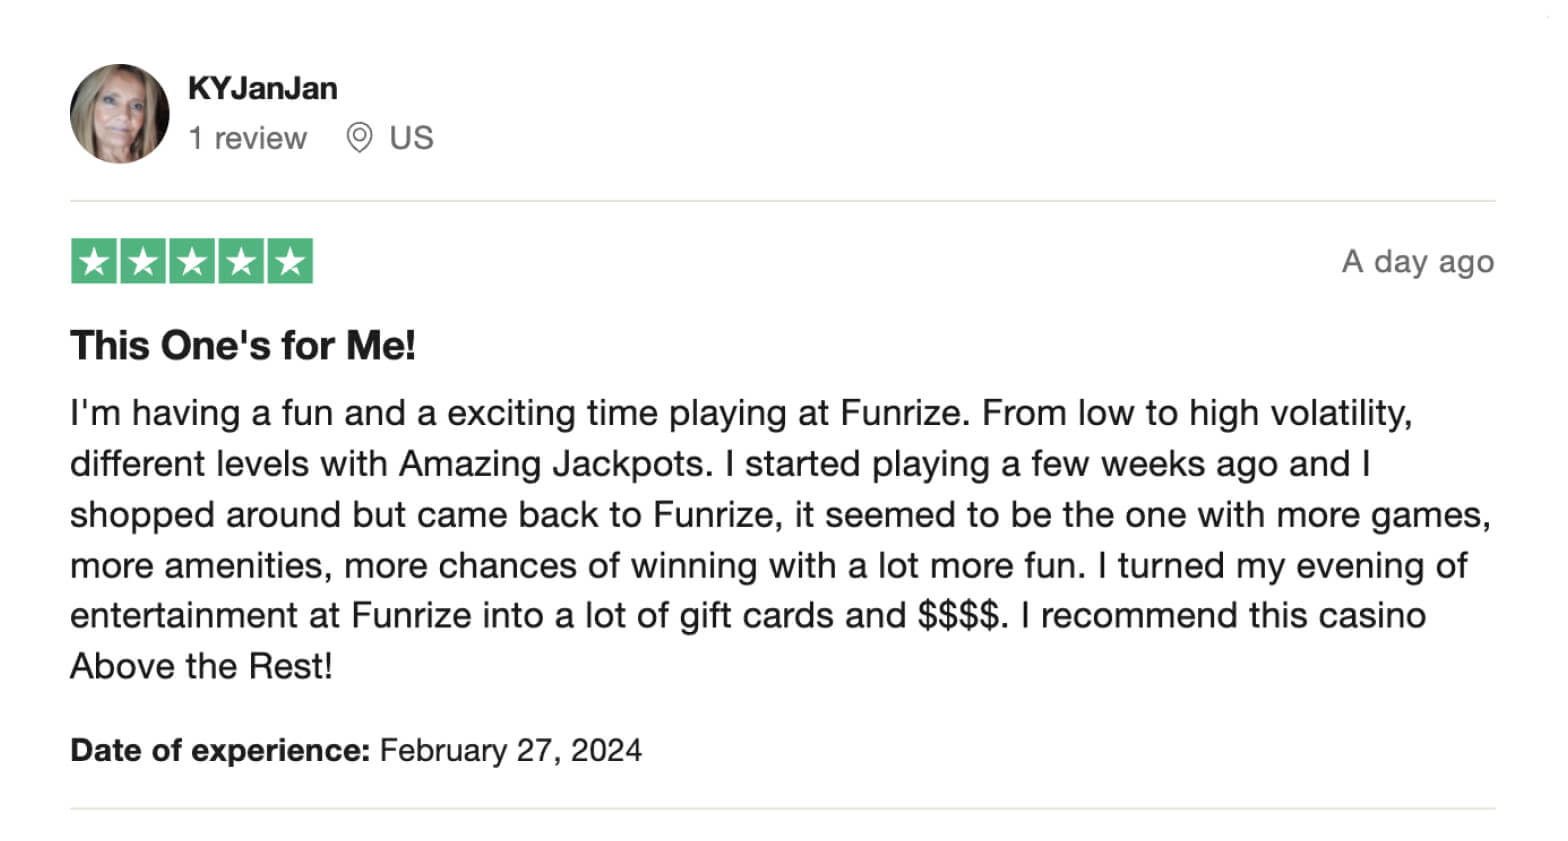 Apple App store ratings for the Funrize app